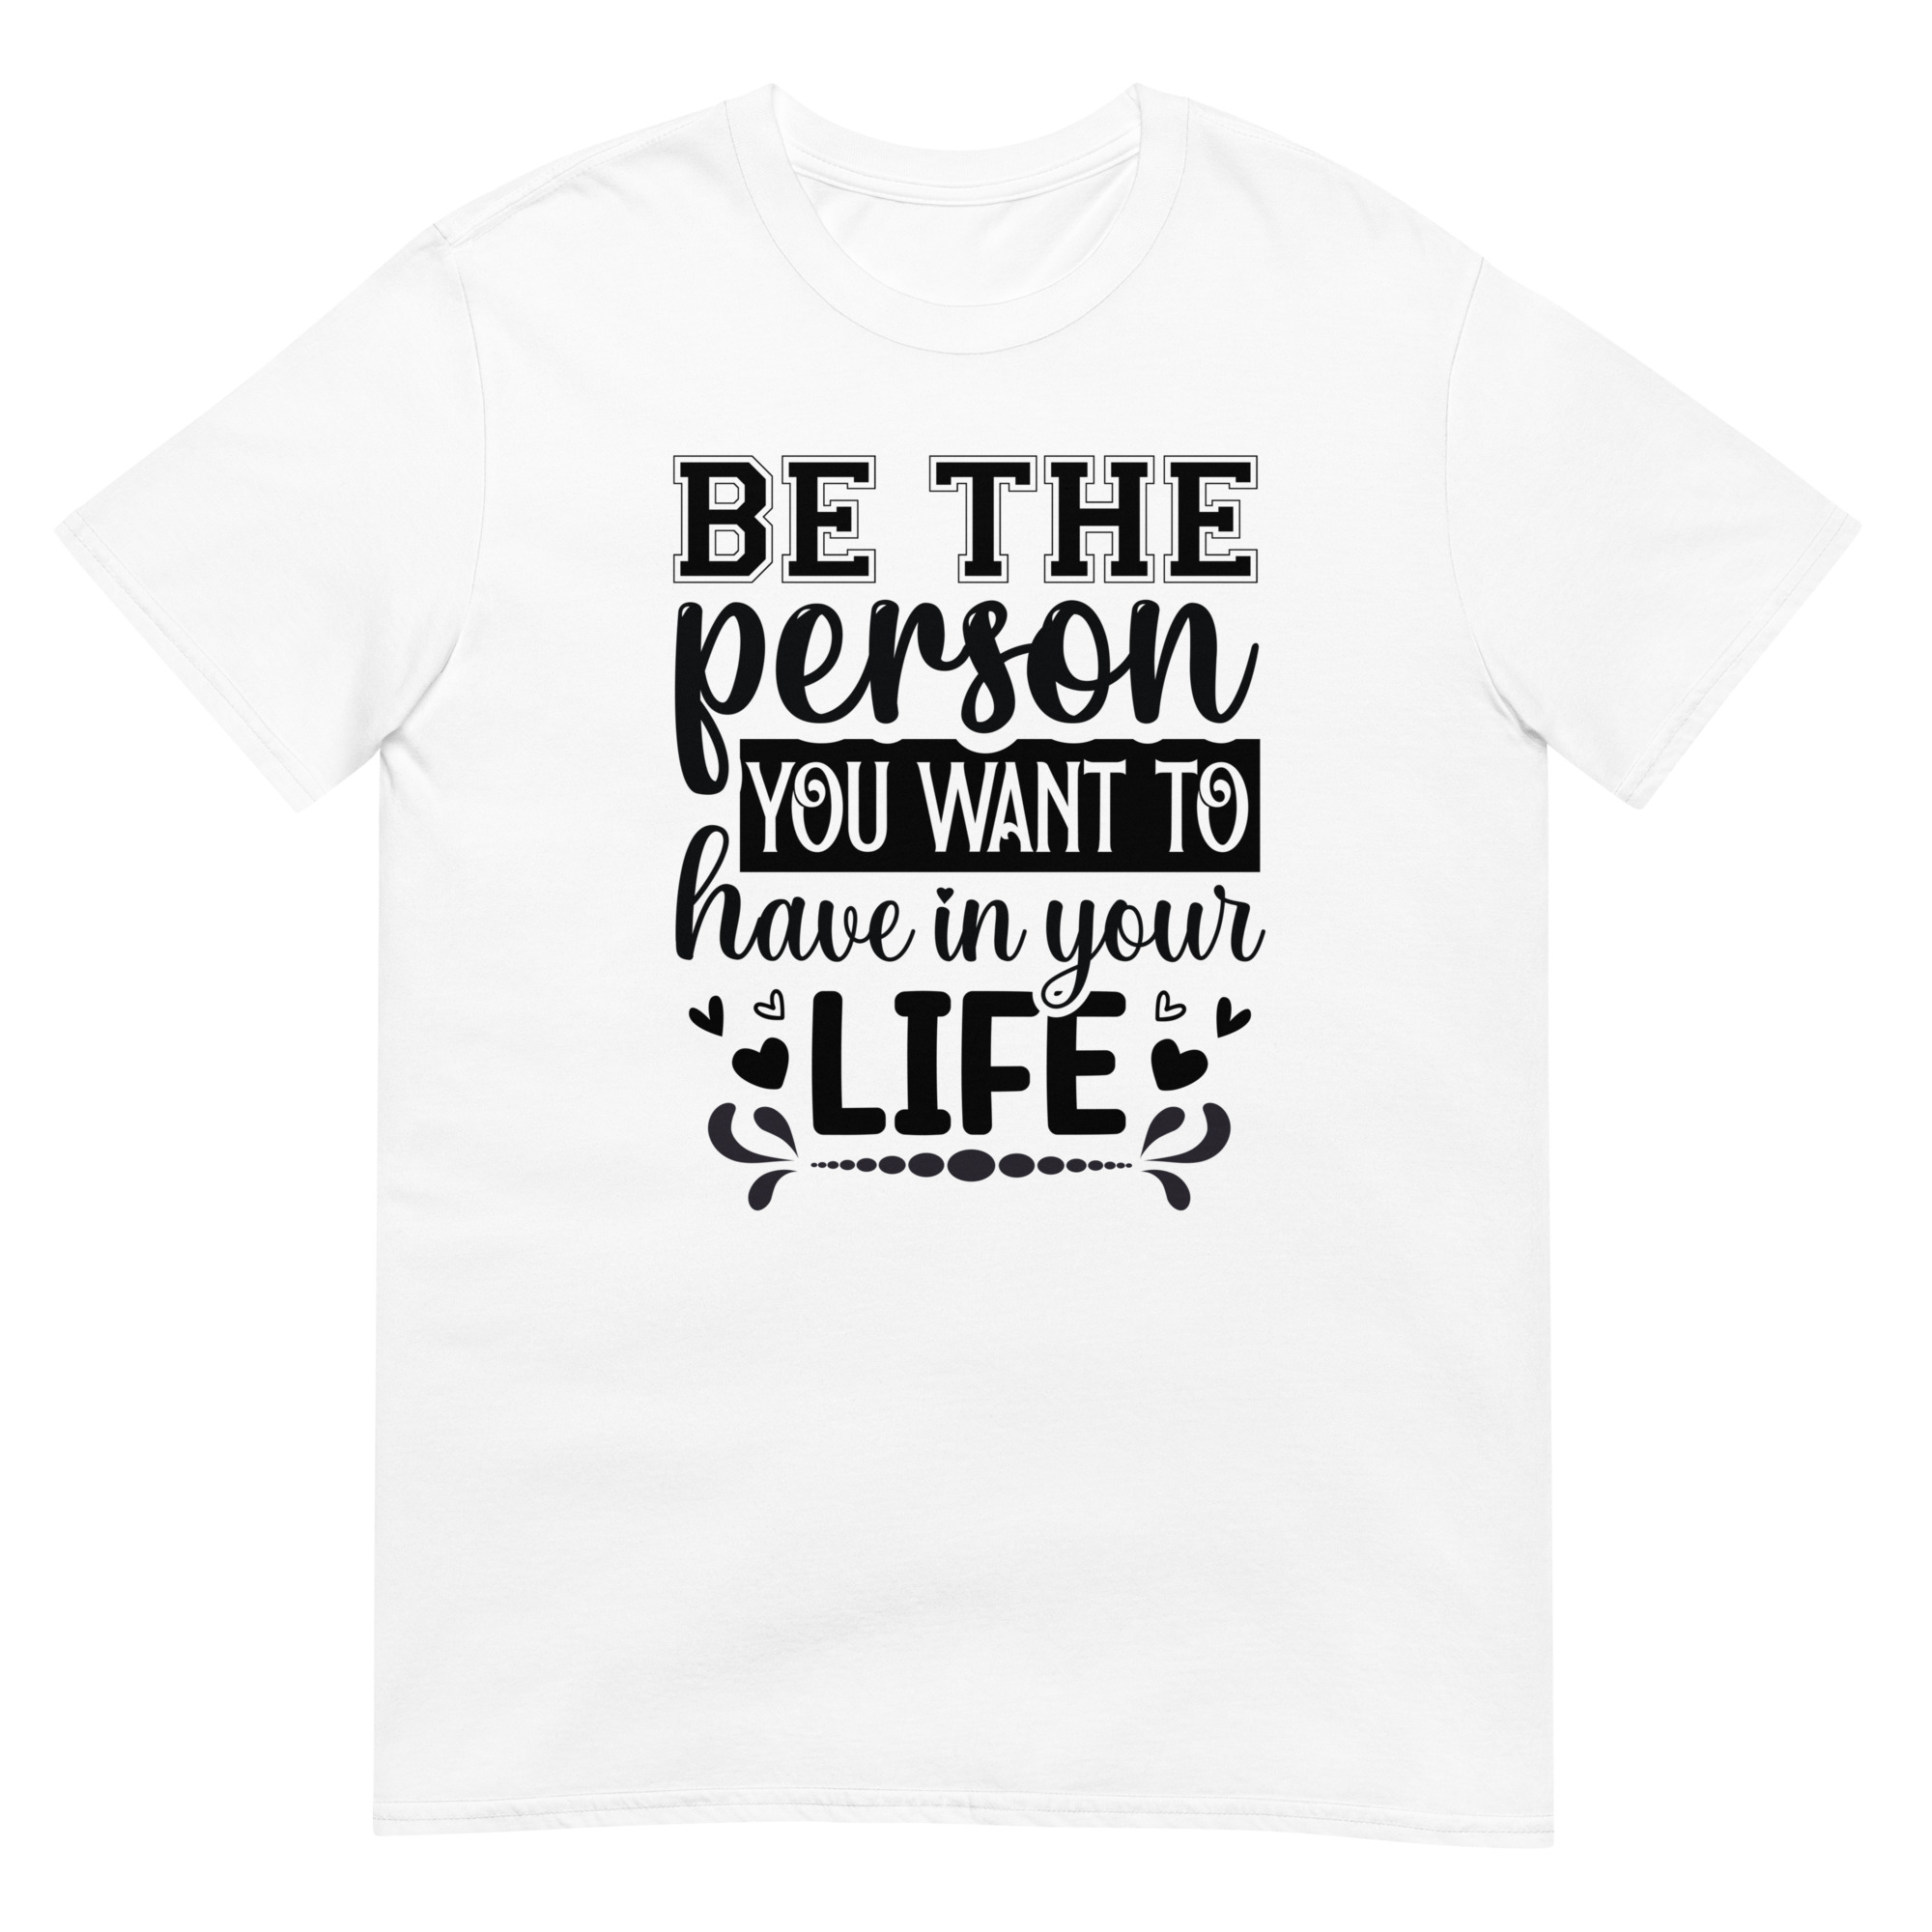 Be The Person You Want To Have In Your Life - Unisex Motivational Quote T-Shirt